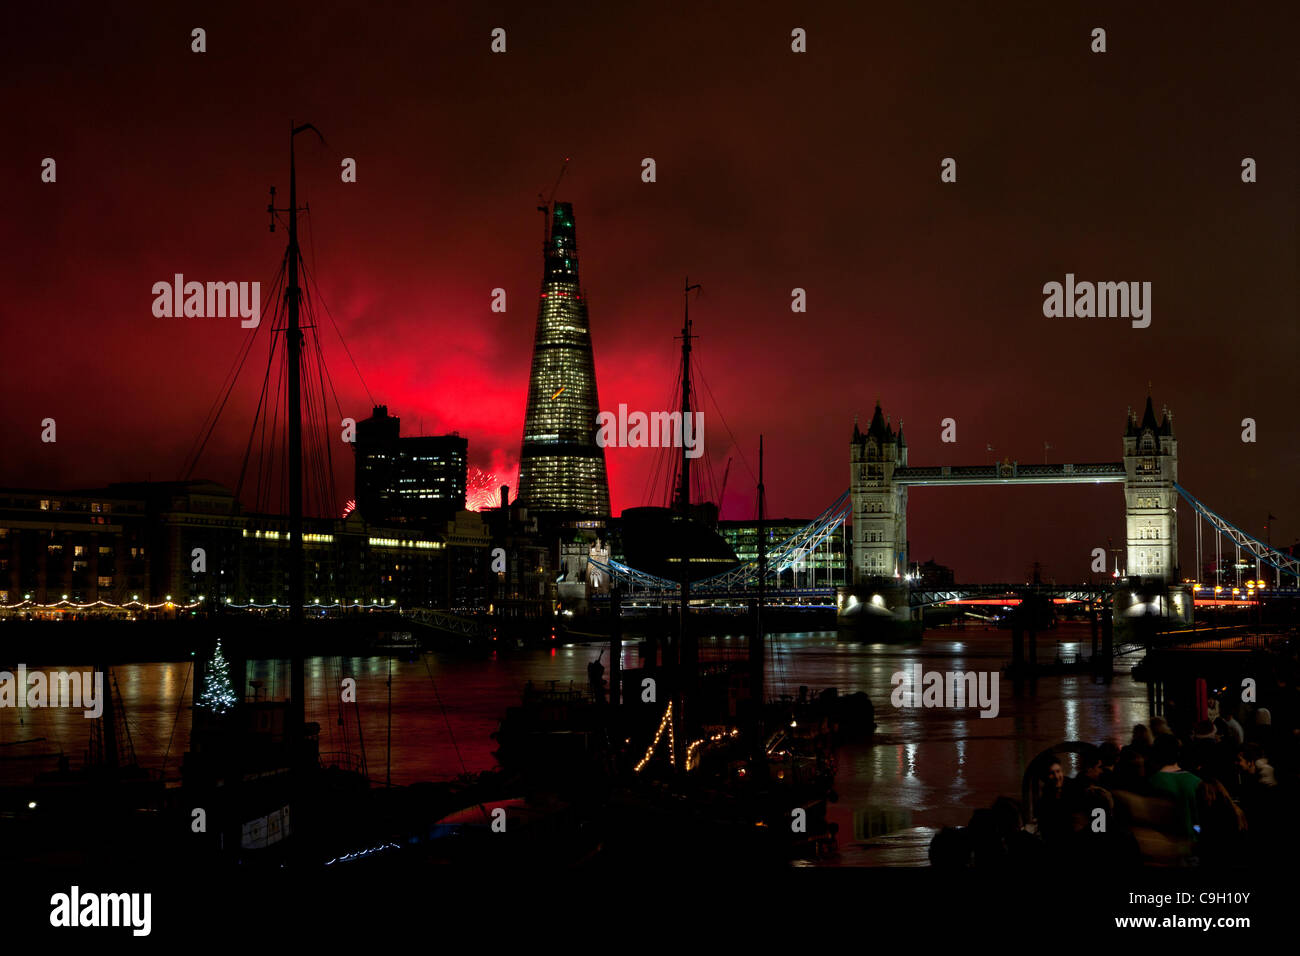 London Shard and Tower Bridge back-lit at night by New Years Eve fireworks display on River Thames Stock Photo